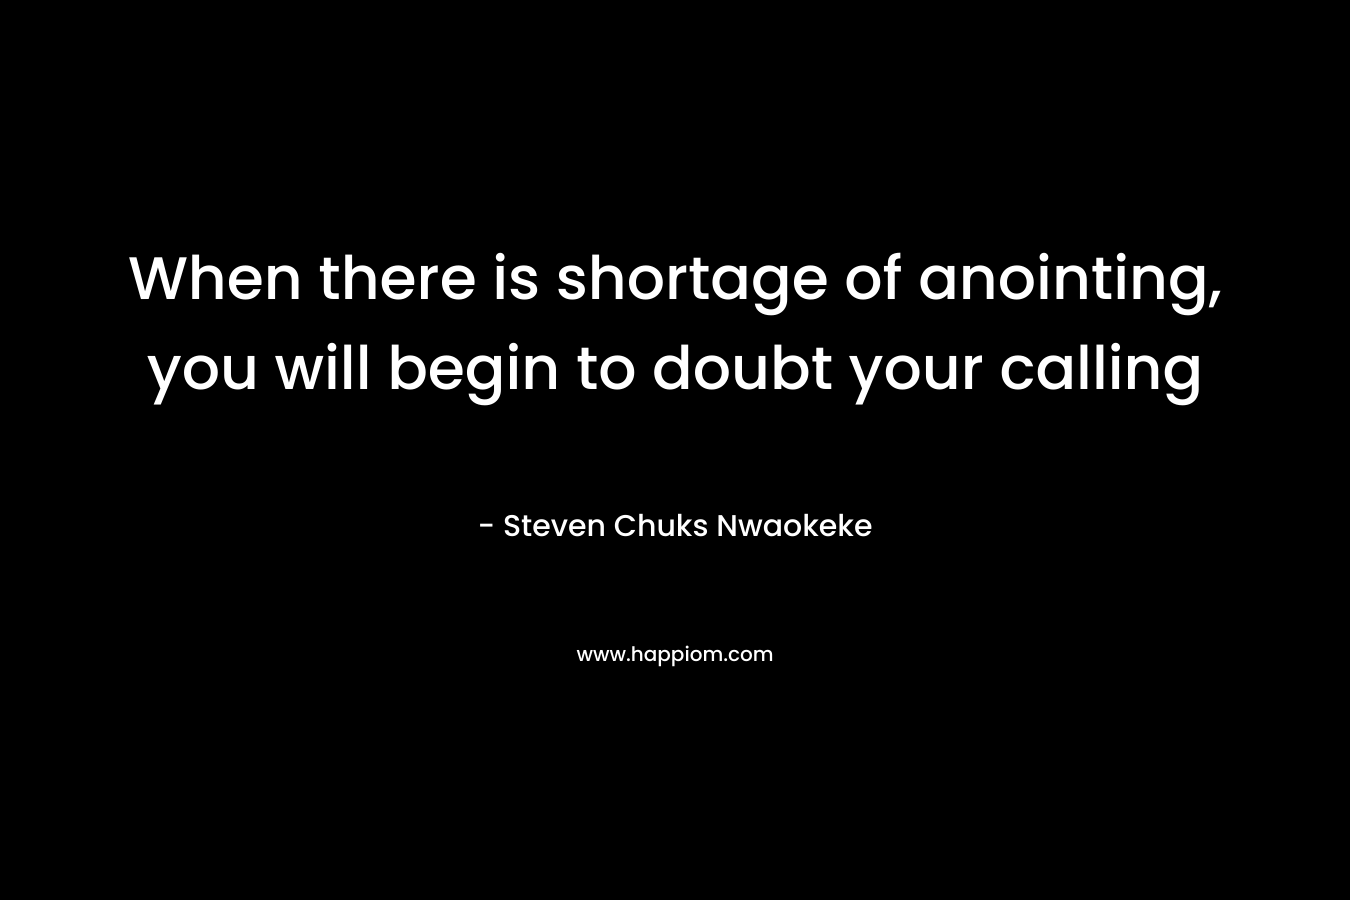 When there is shortage of anointing, you will begin to doubt your calling – Steven Chuks Nwaokeke